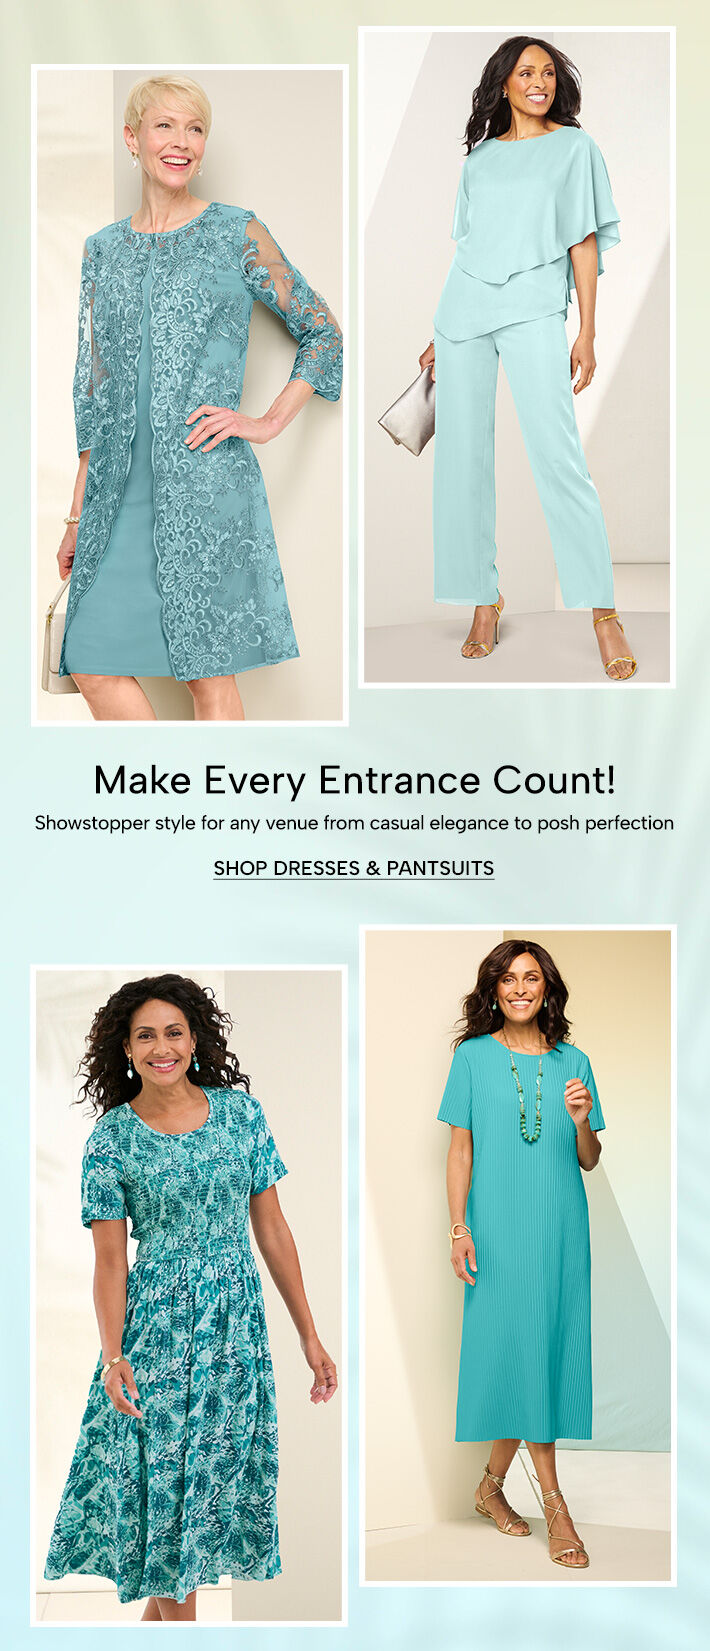 Make every entrance count! Showstopper style for any venue from casual elegance to posh perfection. Shop Dresses & Pantsets